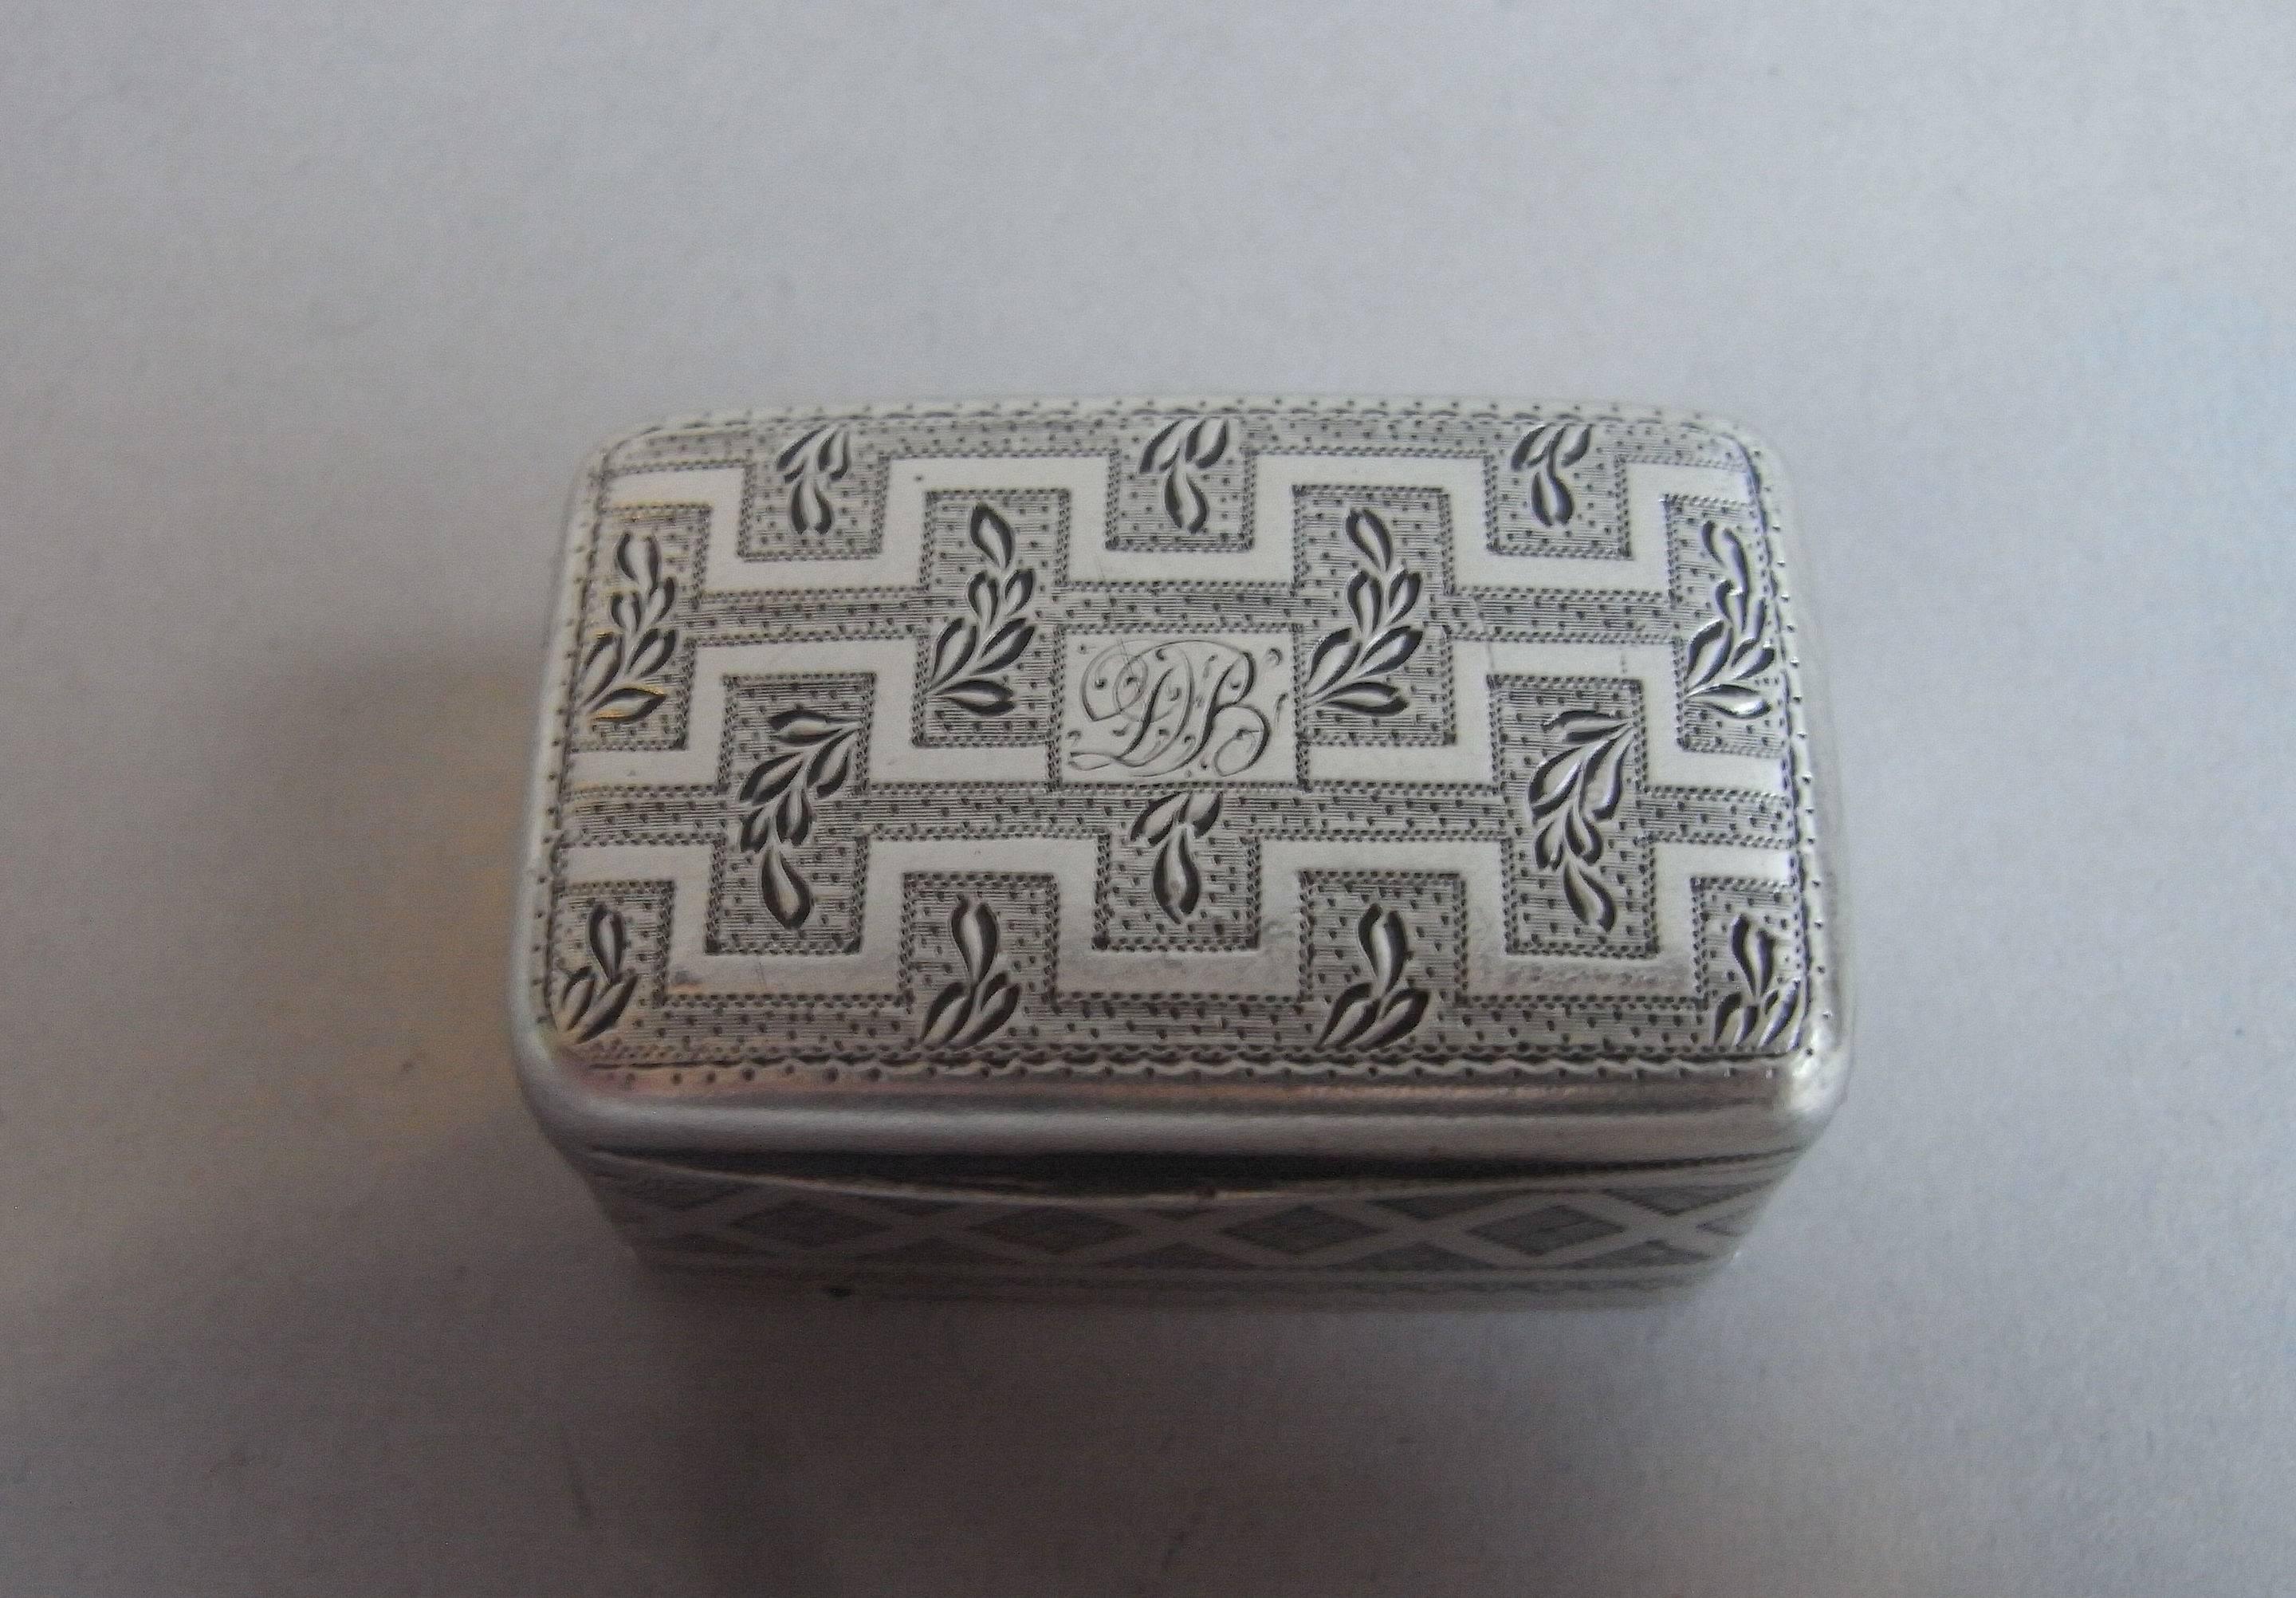 The nutmeg grater is broad rectangular in form and the cover and base are beautifully engraved with two bands of Greek key designs surrounded by a prick dot ground and unusual bright cut stylized foliate motifs. The engraving is particularly